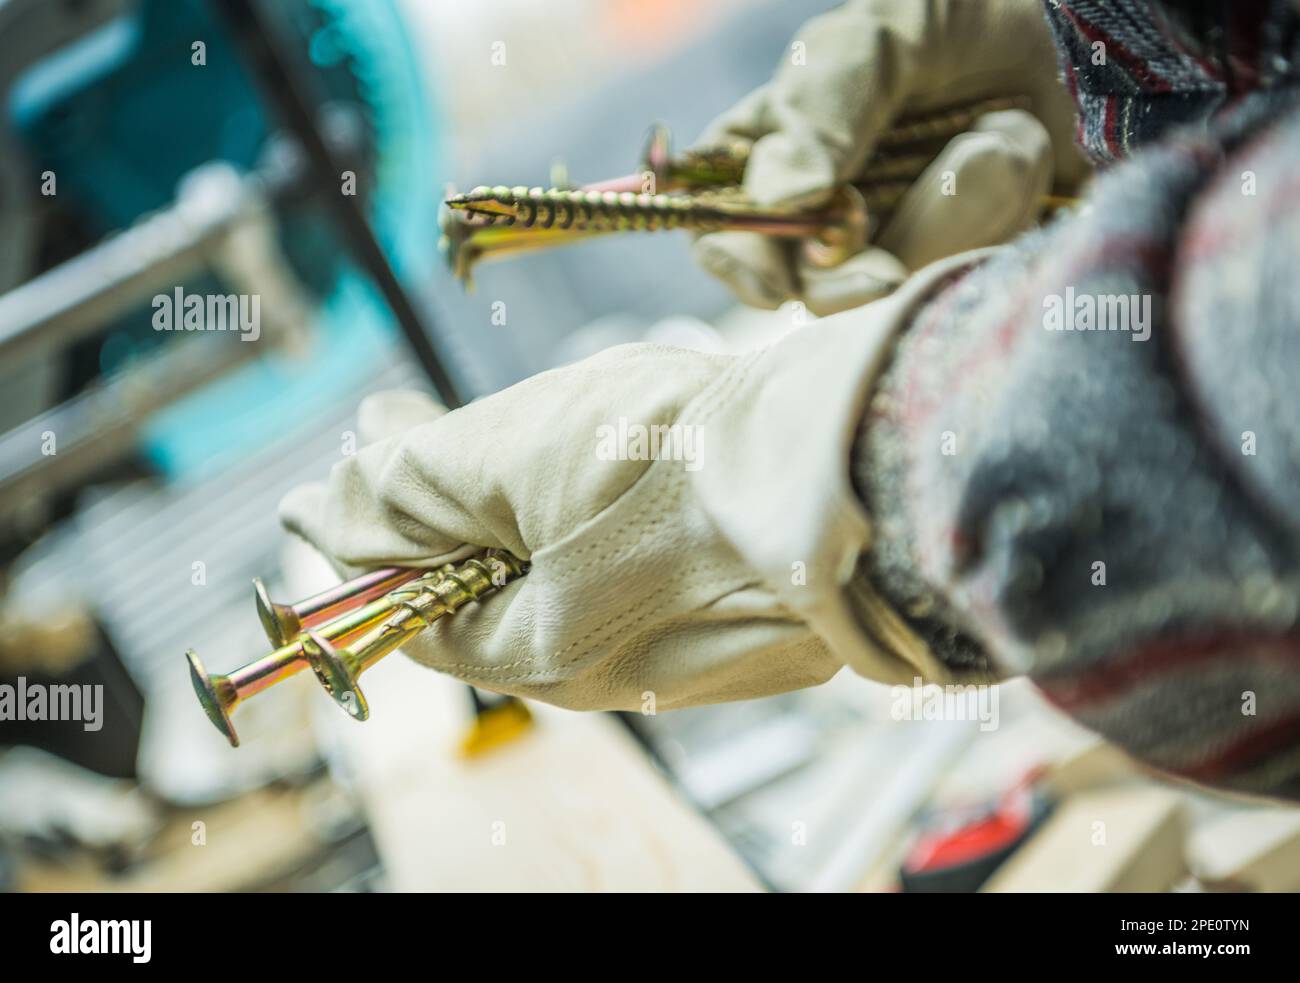 Wood Material Coarse Threaded Screws in Contractors Hands. Protective Gloves Wearing. General Construction Theme. Stock Photo